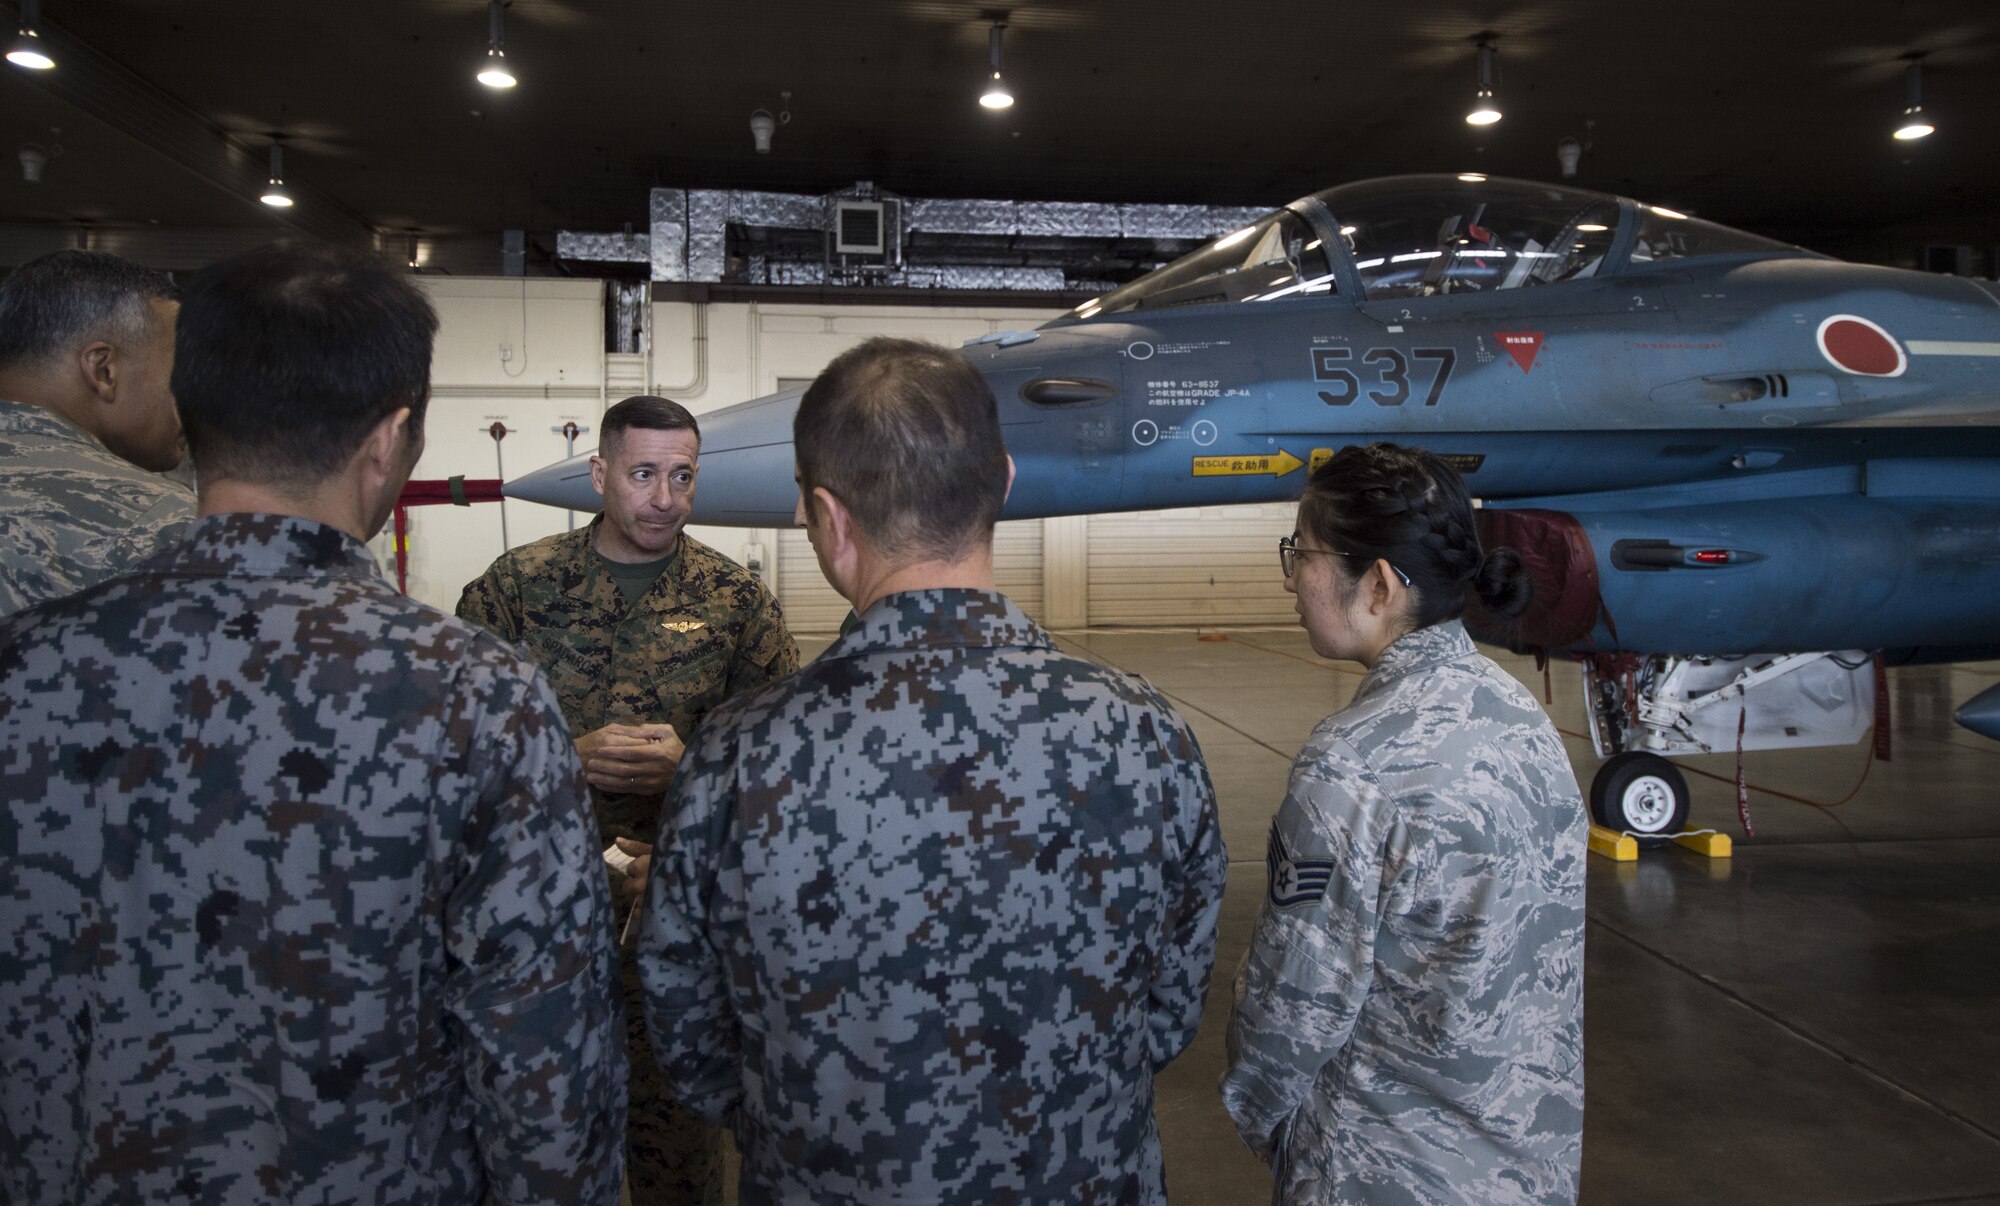 U.S. Marine Corps Sgt. Maj. Anthony Spadaro, the U.S. Pacific Command senior enlisted leader, visited Misawa Air Base, Japan, for the first time, Dec. 20 and 21.